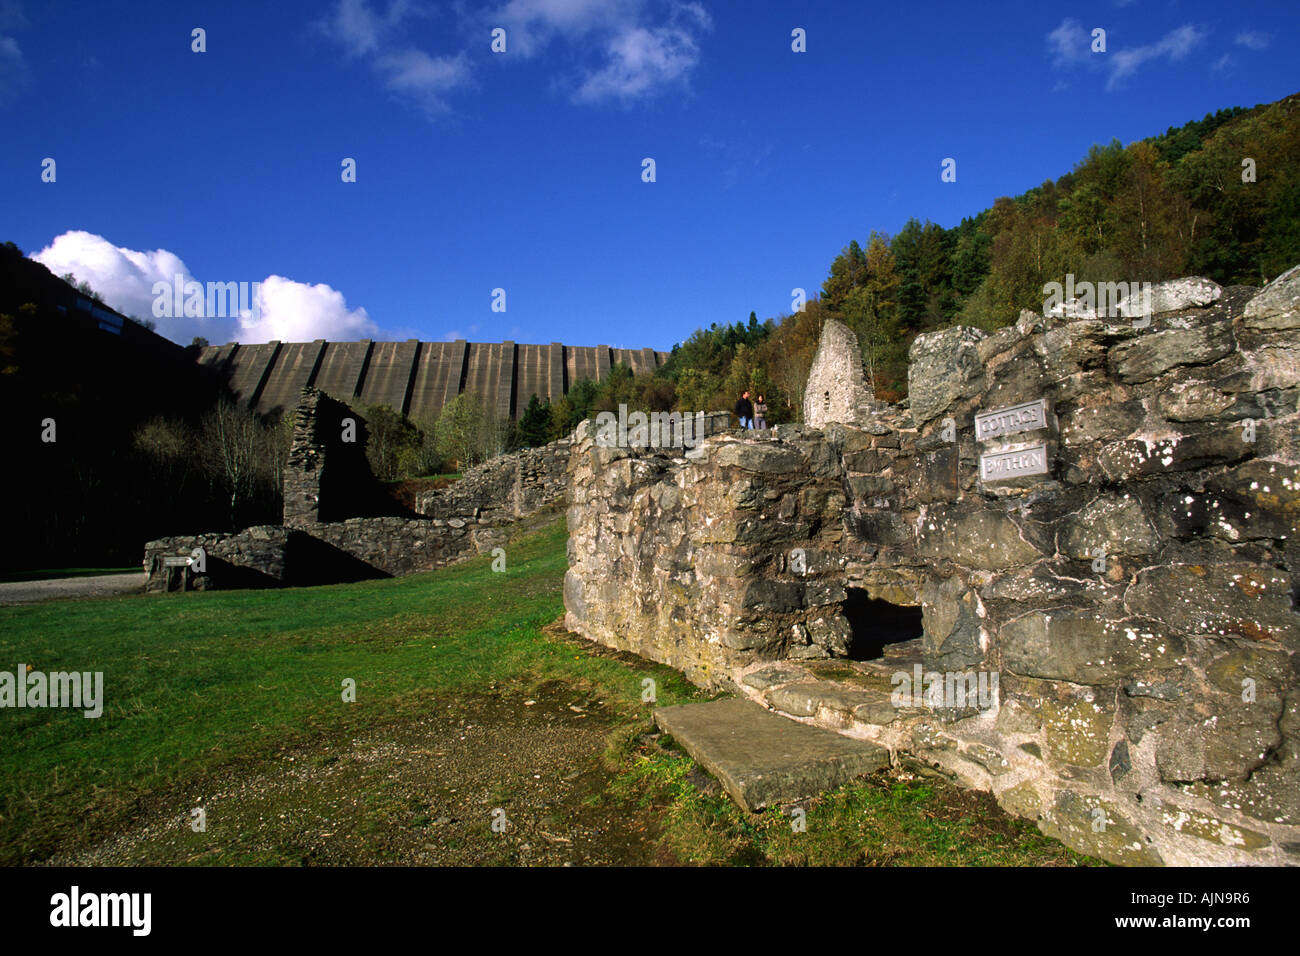 The Clywedog Dam towers above the preserved ruins of the Bryntail lead mine. Stock Photo